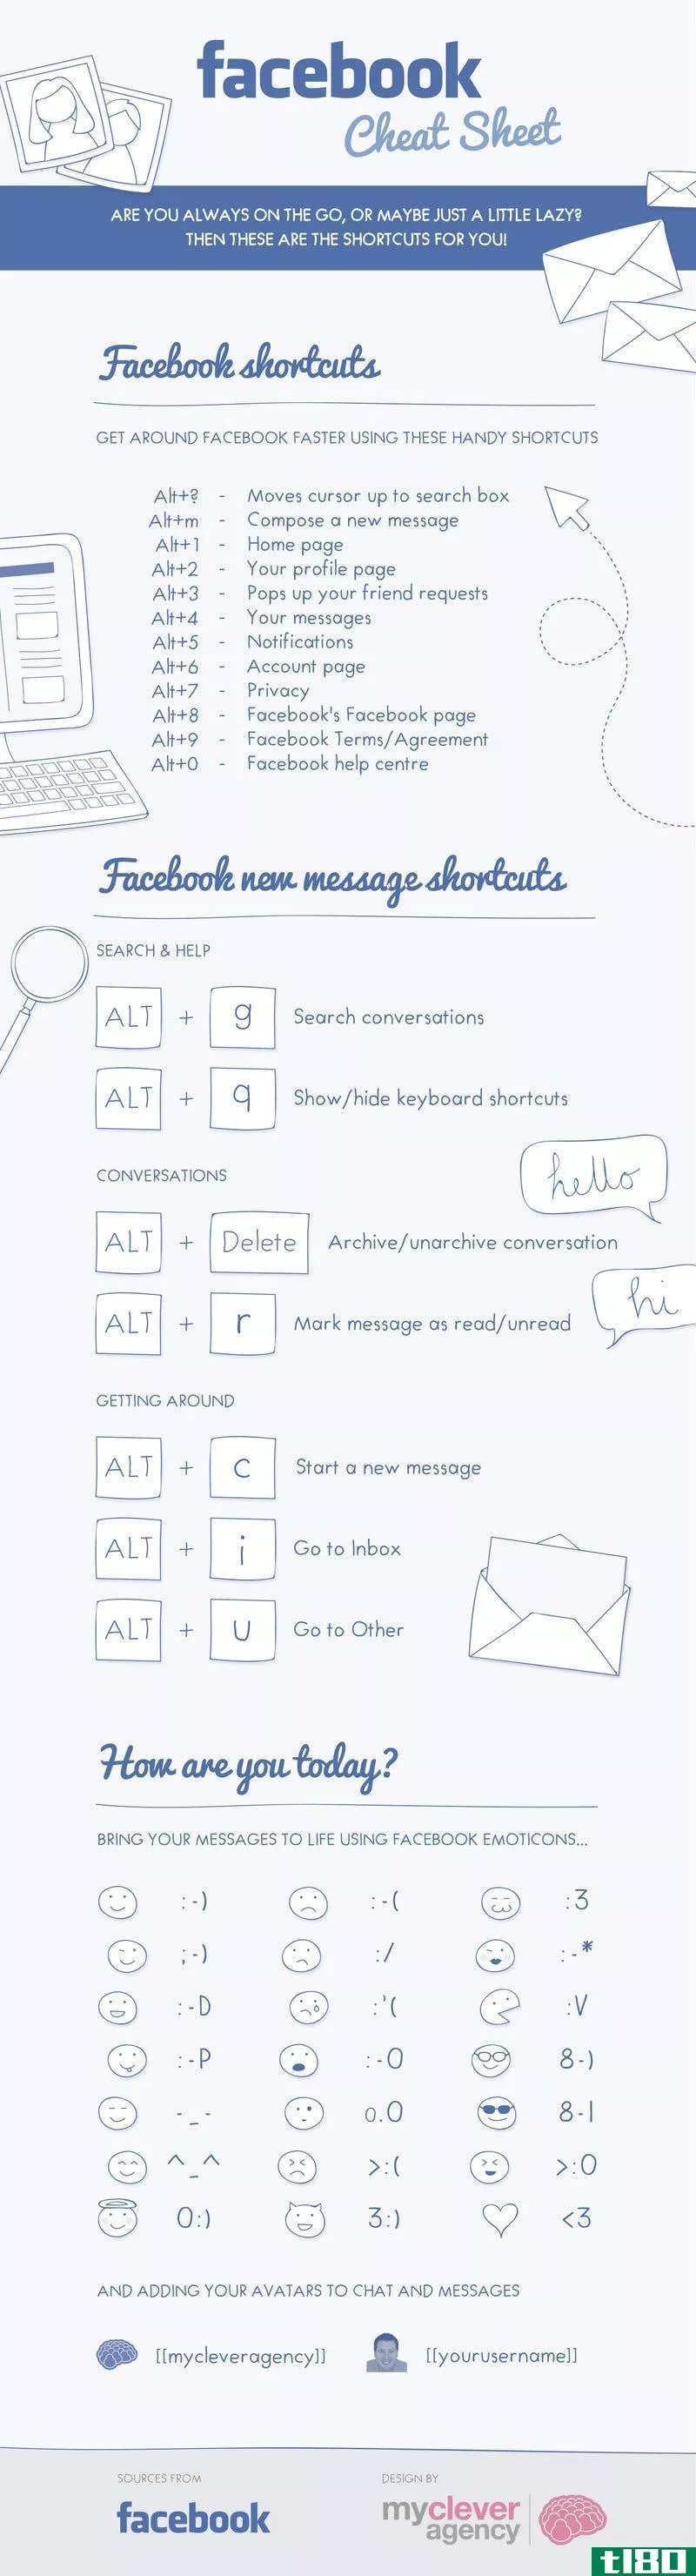 Illustration for article titled The Facebook Cheat Sheet Shows All the Facebook Keyboard Shortcuts